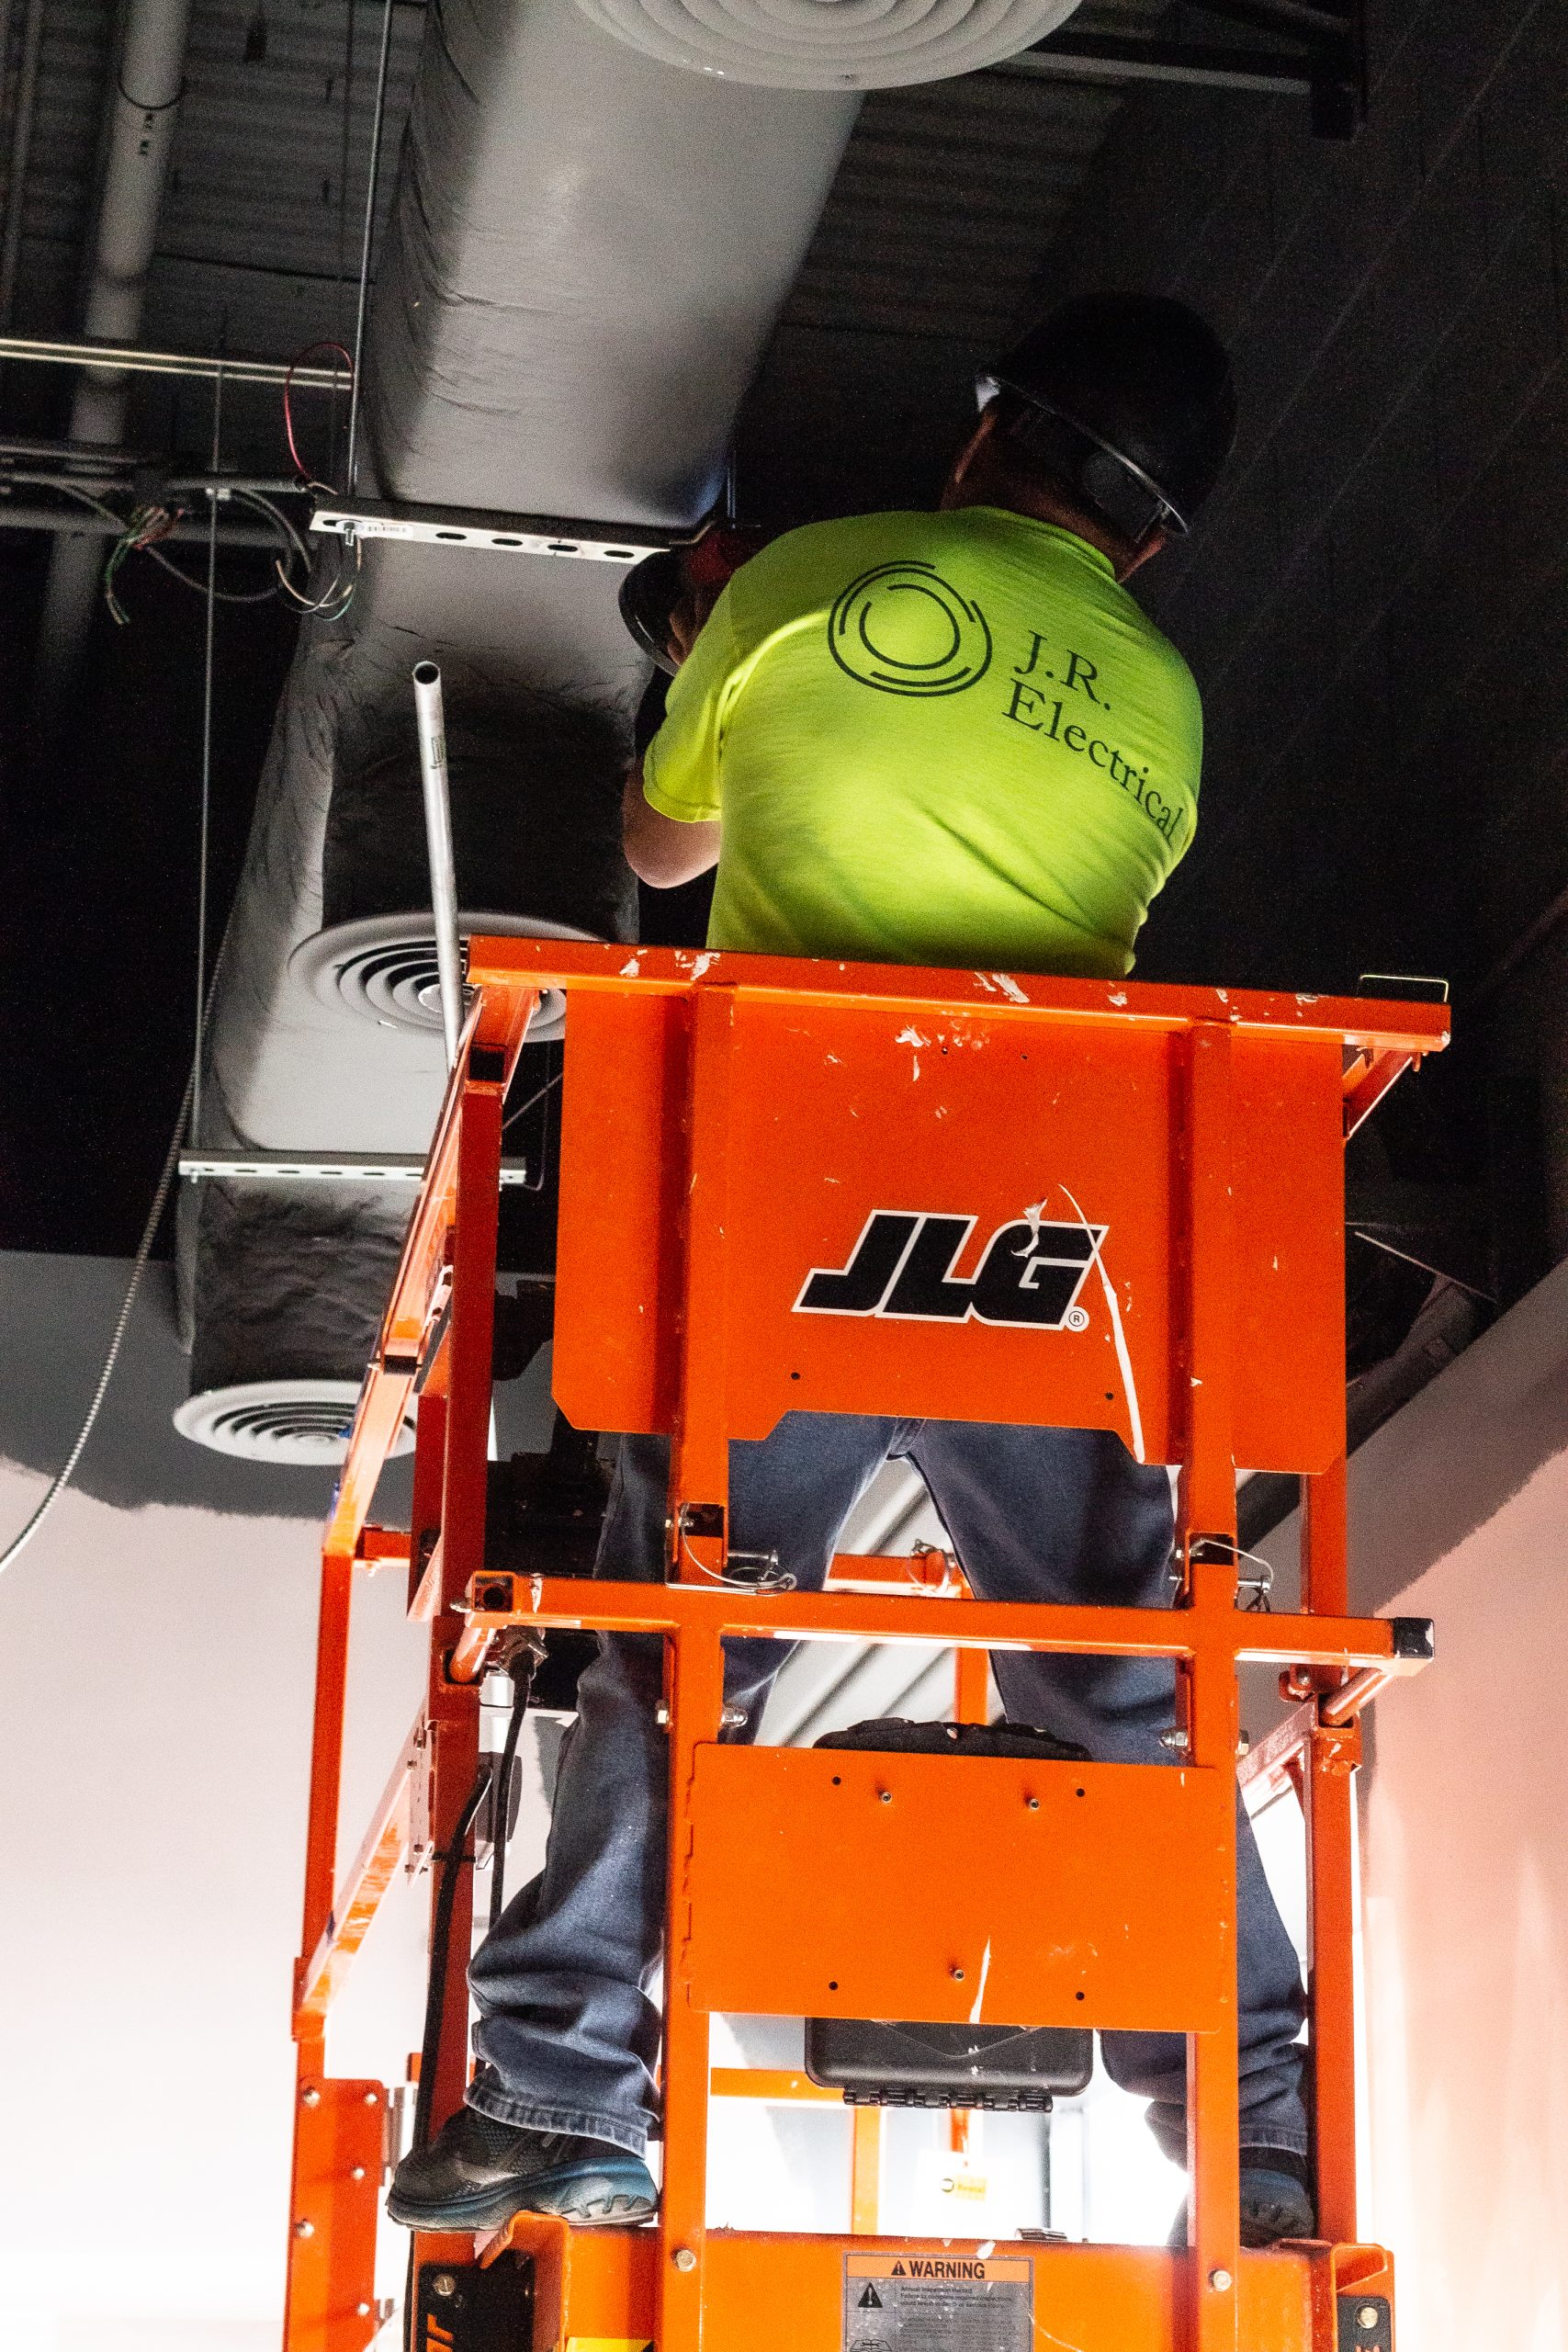 An electrician wearing a bright yellow shirt with the logo 'J.R. Electrical' works on ceiling ducts from an orange JLG lift. The worker is focused on adjusting metal brackets and wires, emphasizing the maintenance and infrastructure of the building. The ceiling features large ventilation ducts and wiring, indicating an industrial or commercial setting.